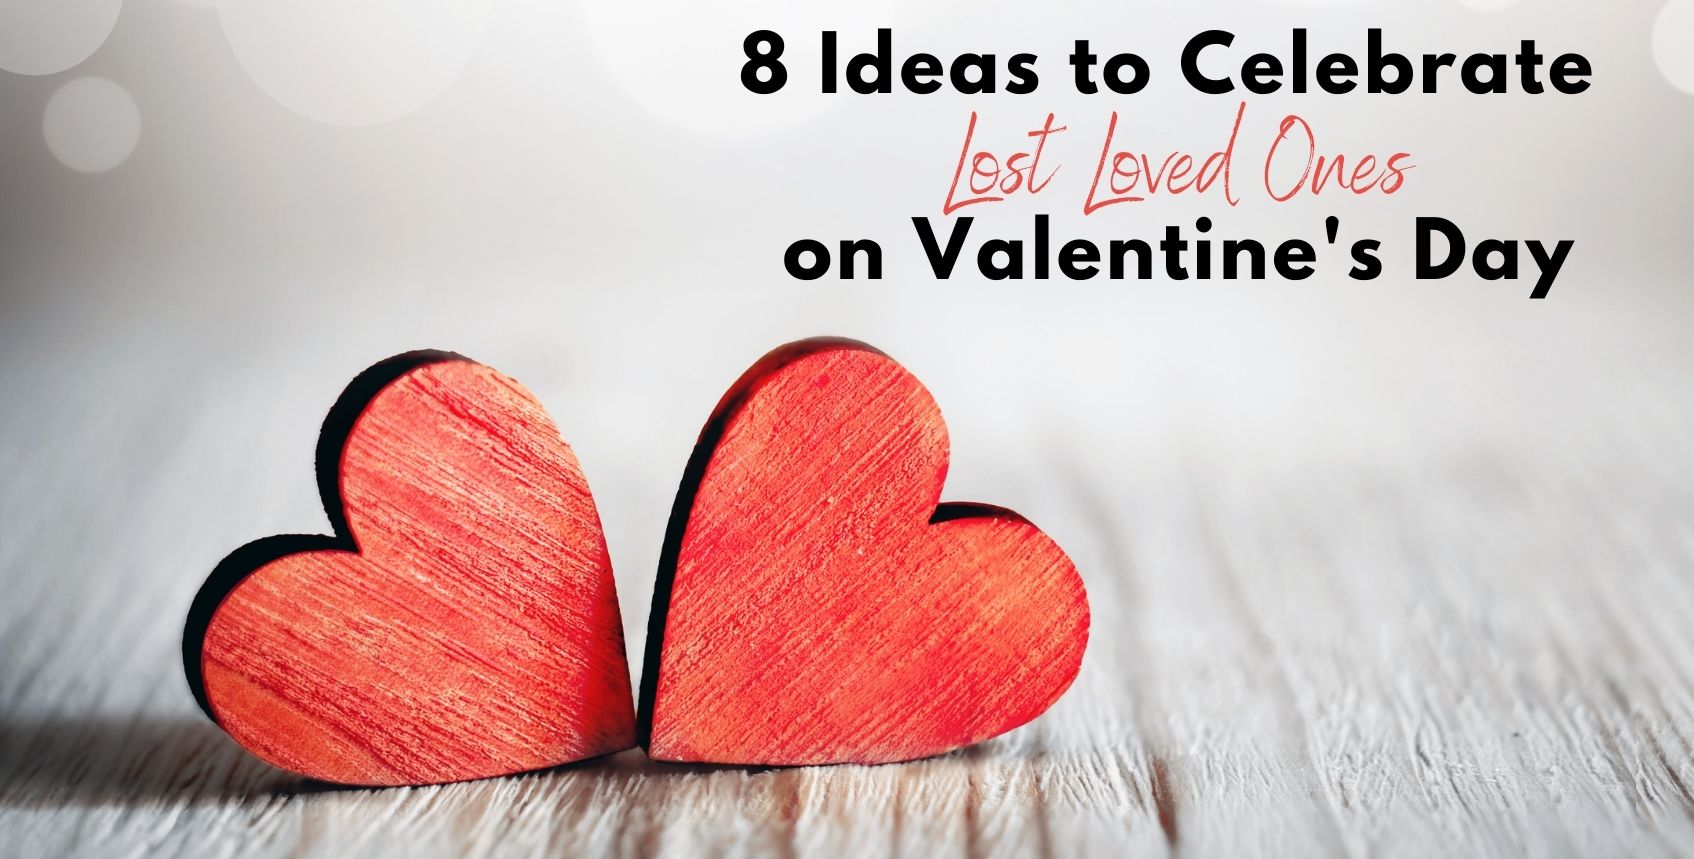 8 Ideas to Celebrate Lost Loved Ones on Valentine's Day